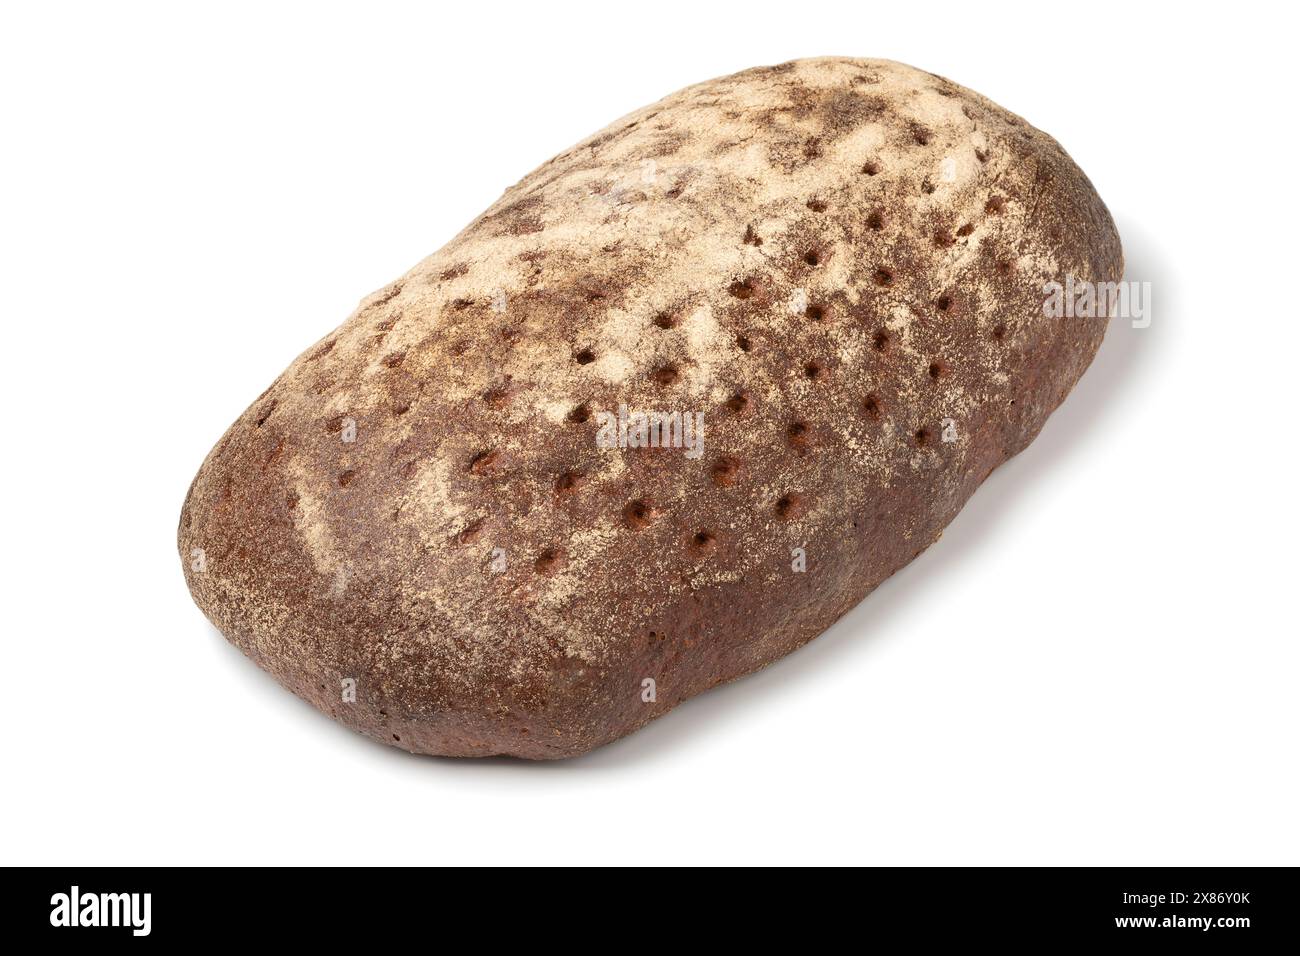 Whole classic Sourdough mixed rye loaf of bread close up isolated on white background Stock Photo